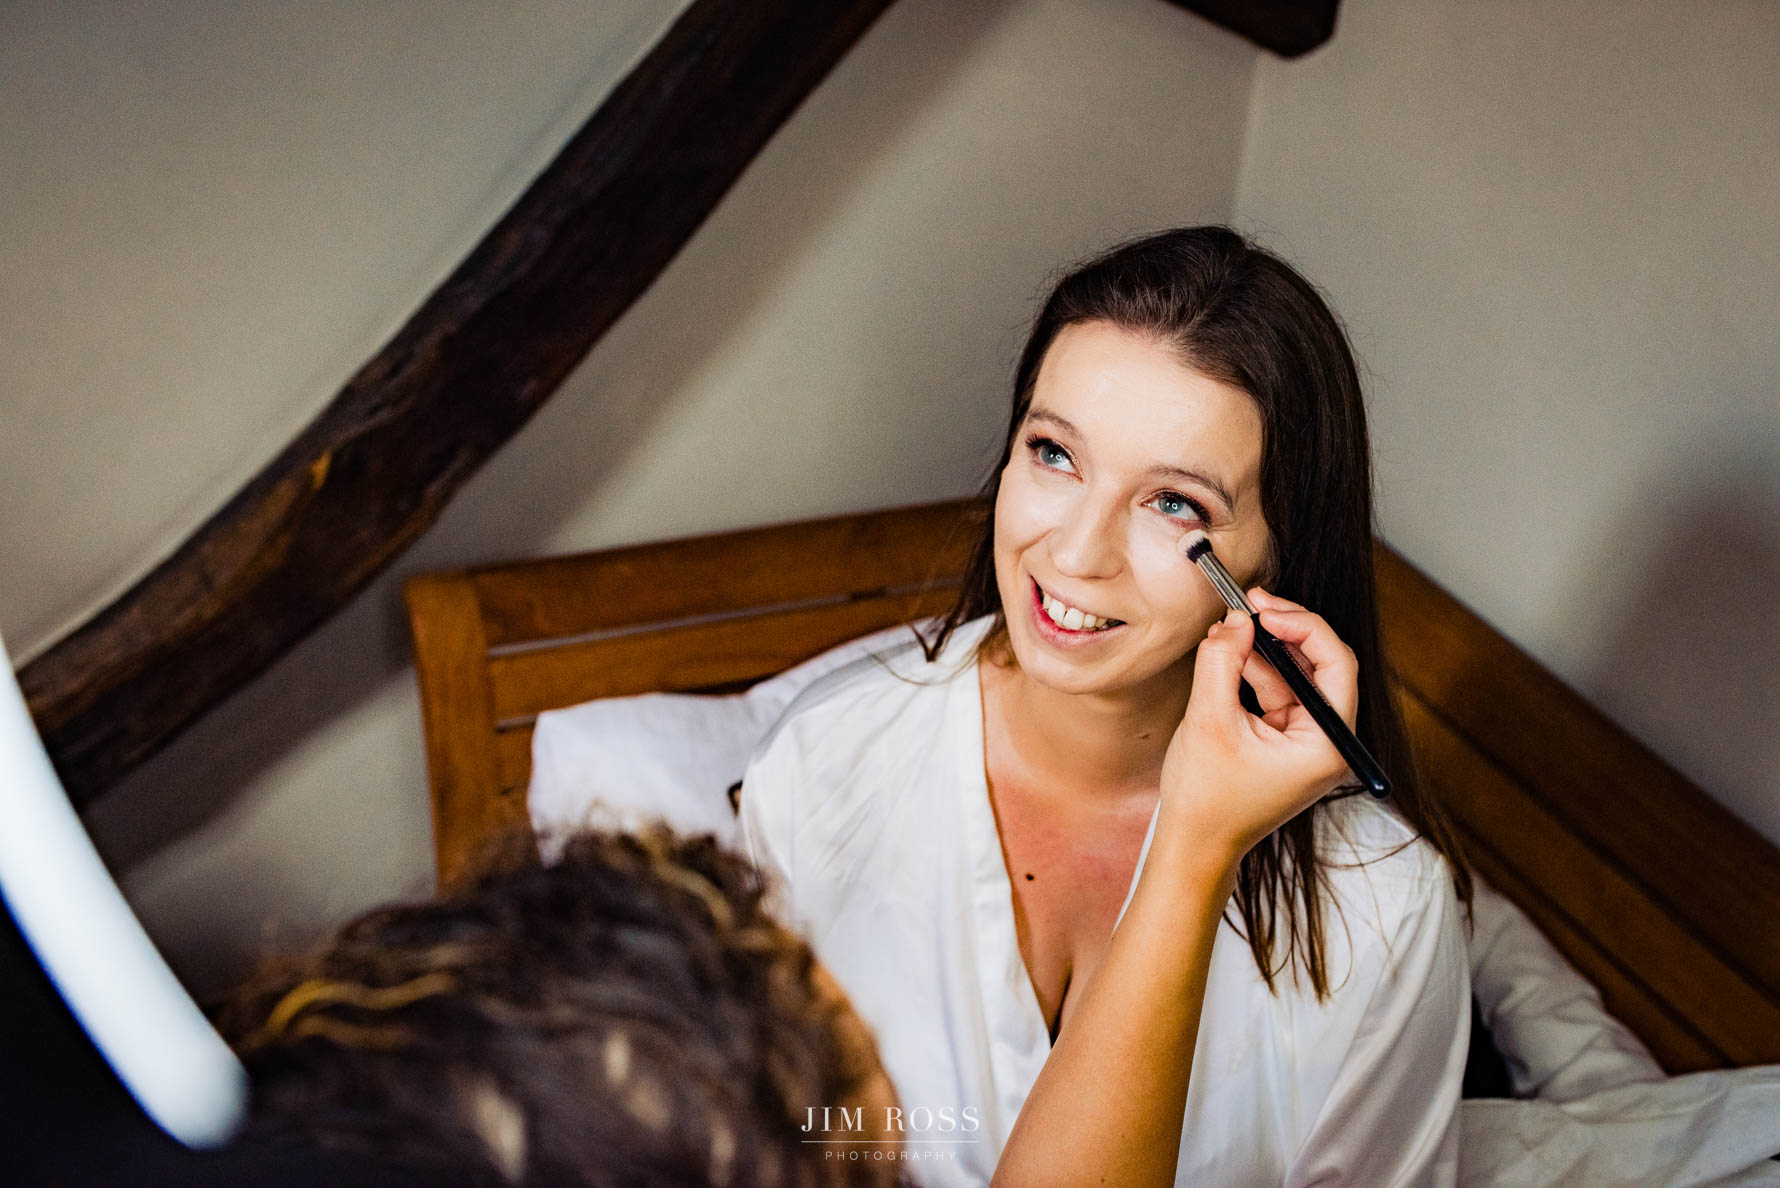 makeup applied to smiling bride